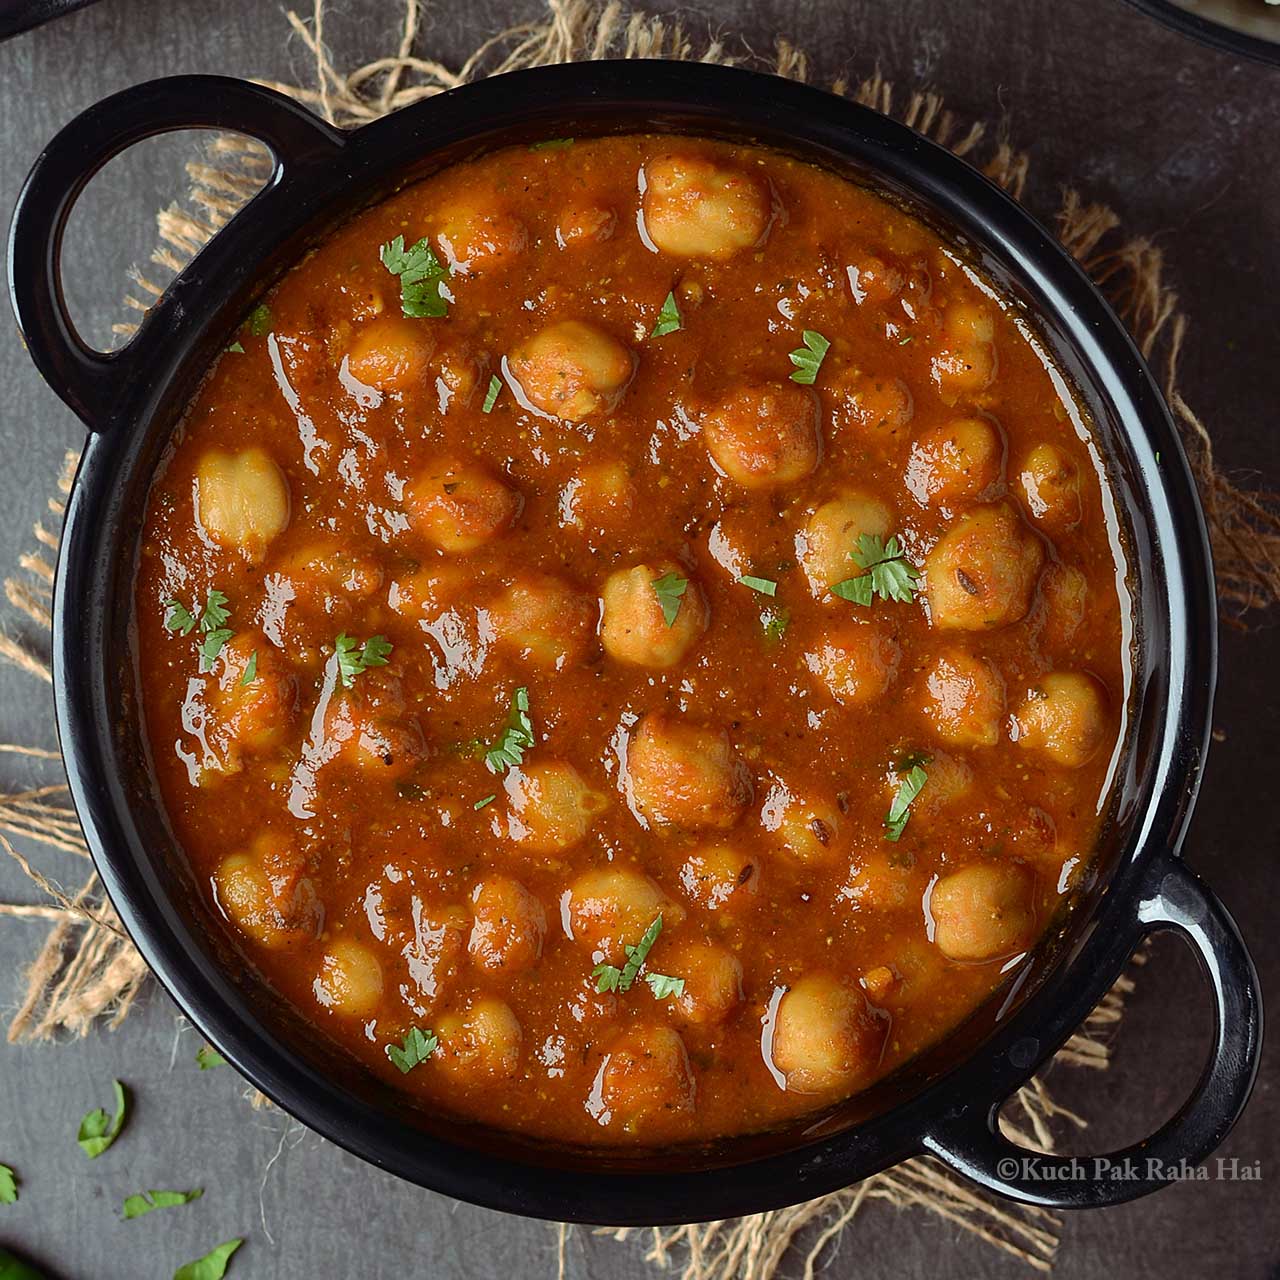 Chana masala recipe or Indian chickpea curry.